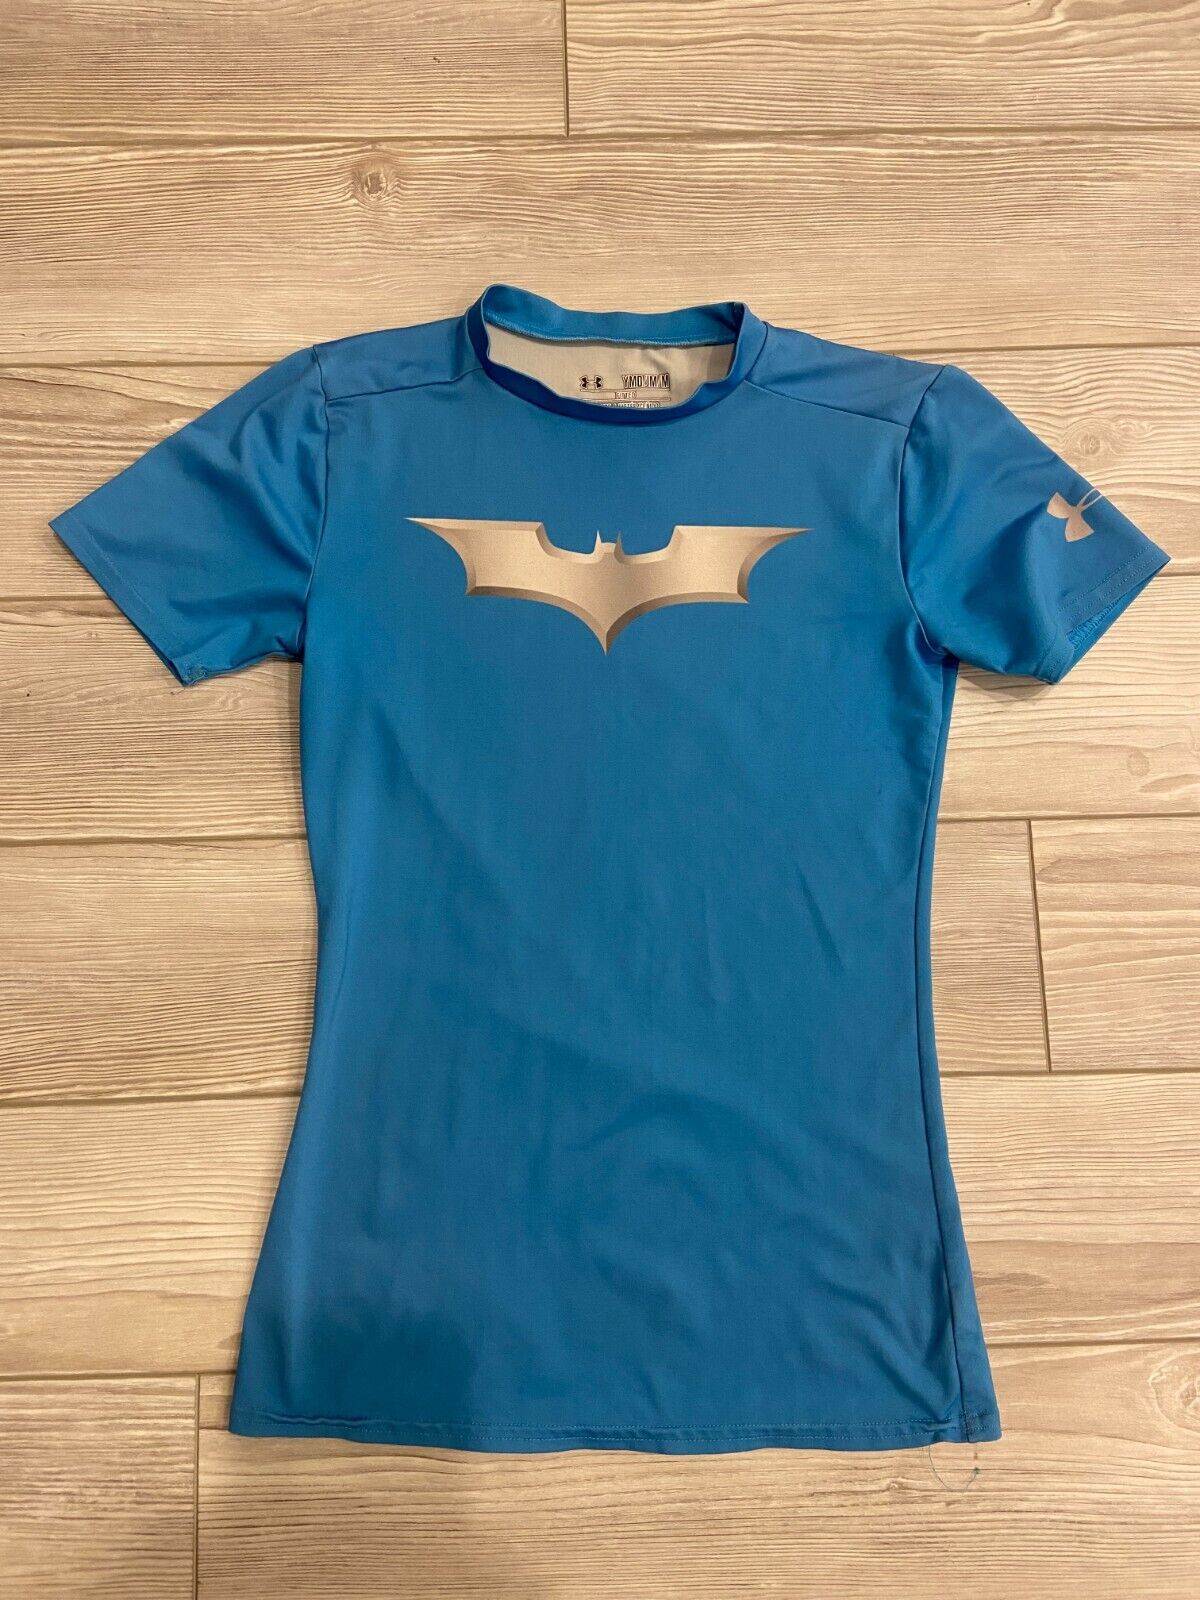 Under Armour Heat Gear Batman Fitted T-shirt (pre-owned / Youth Med. / Blue)